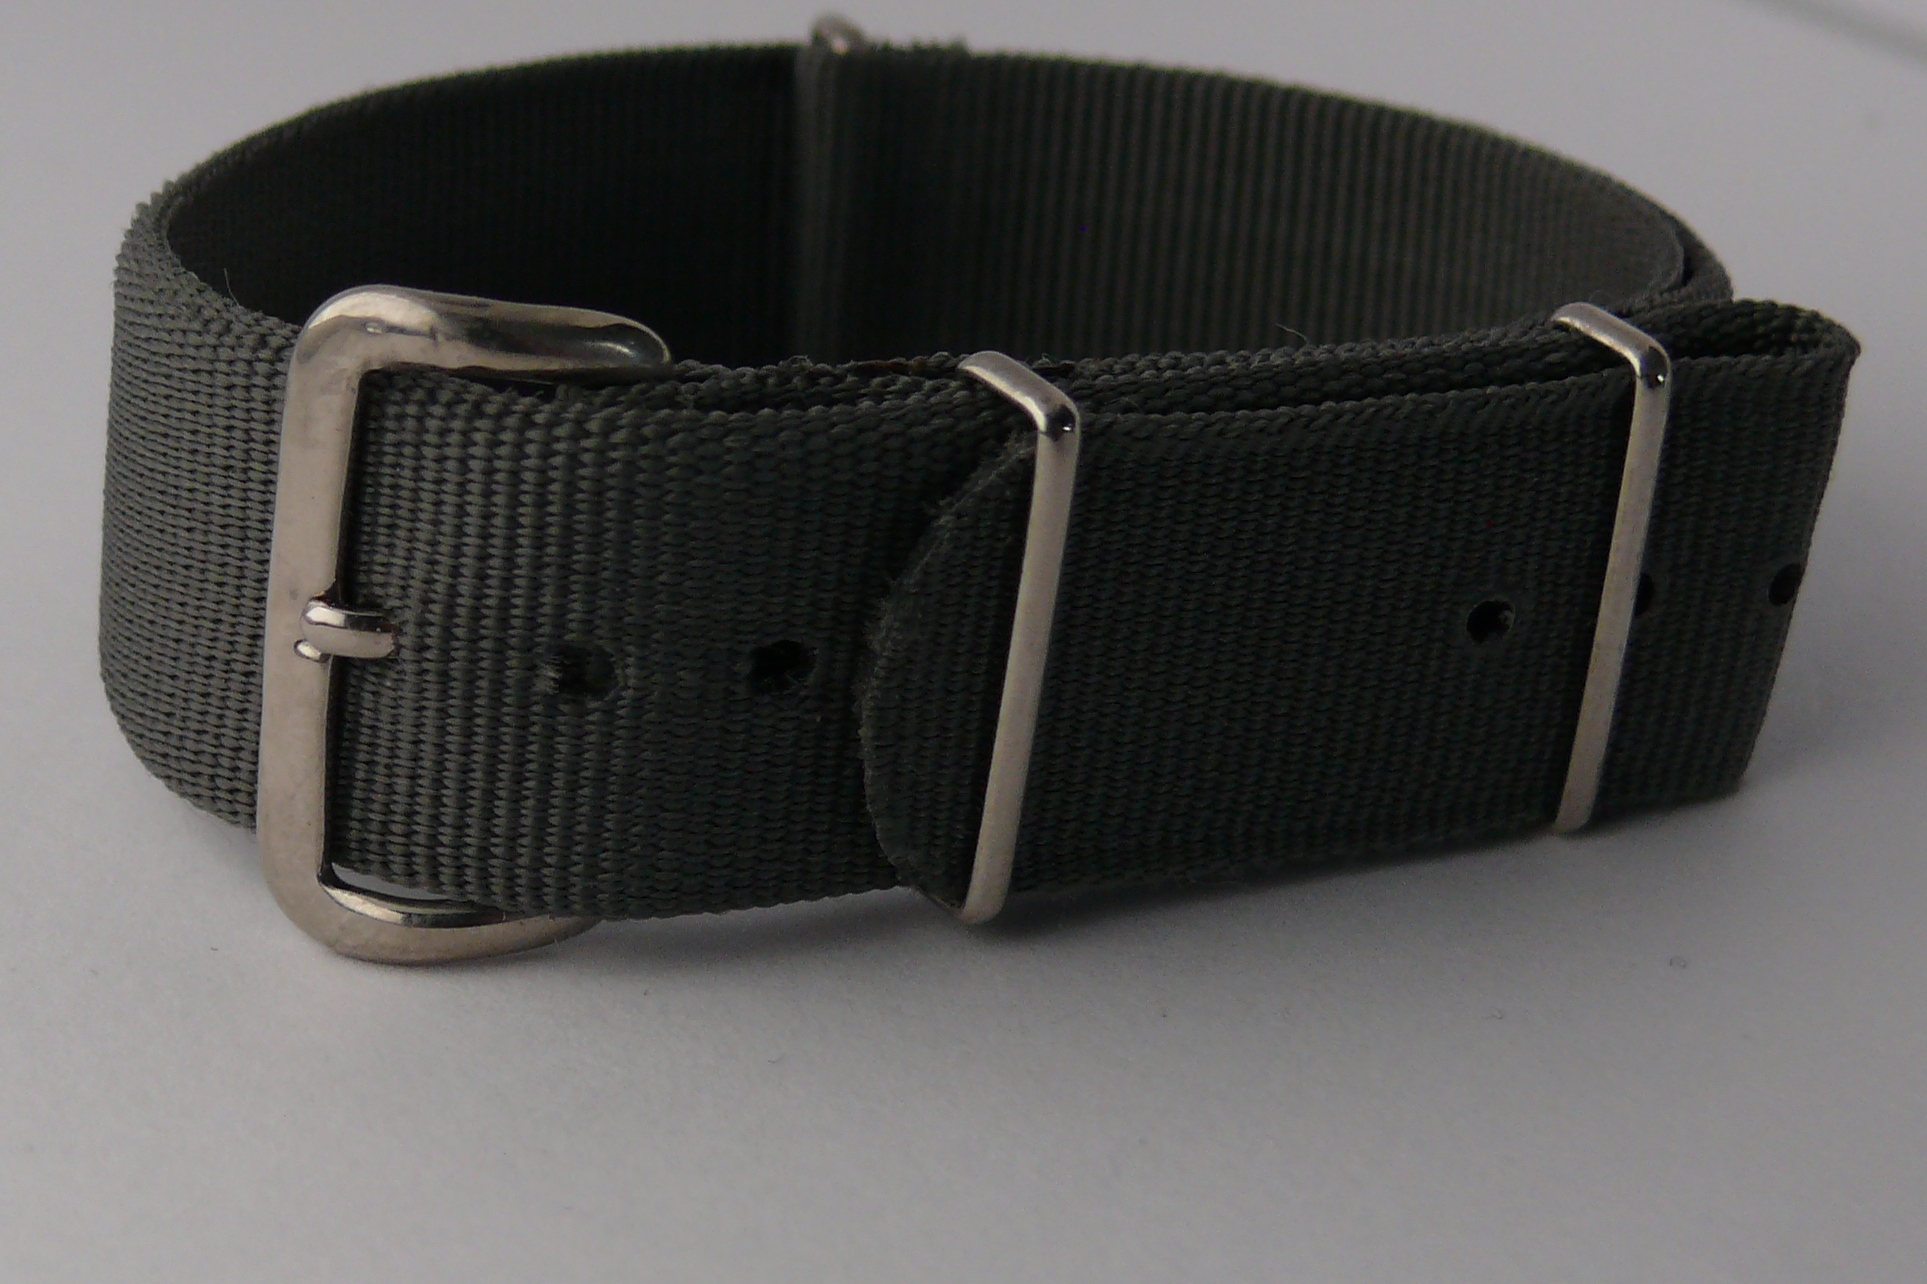 Vintage British Military MOD Admiralty Grey NATO Strap that measures 18mm in width. This can be used